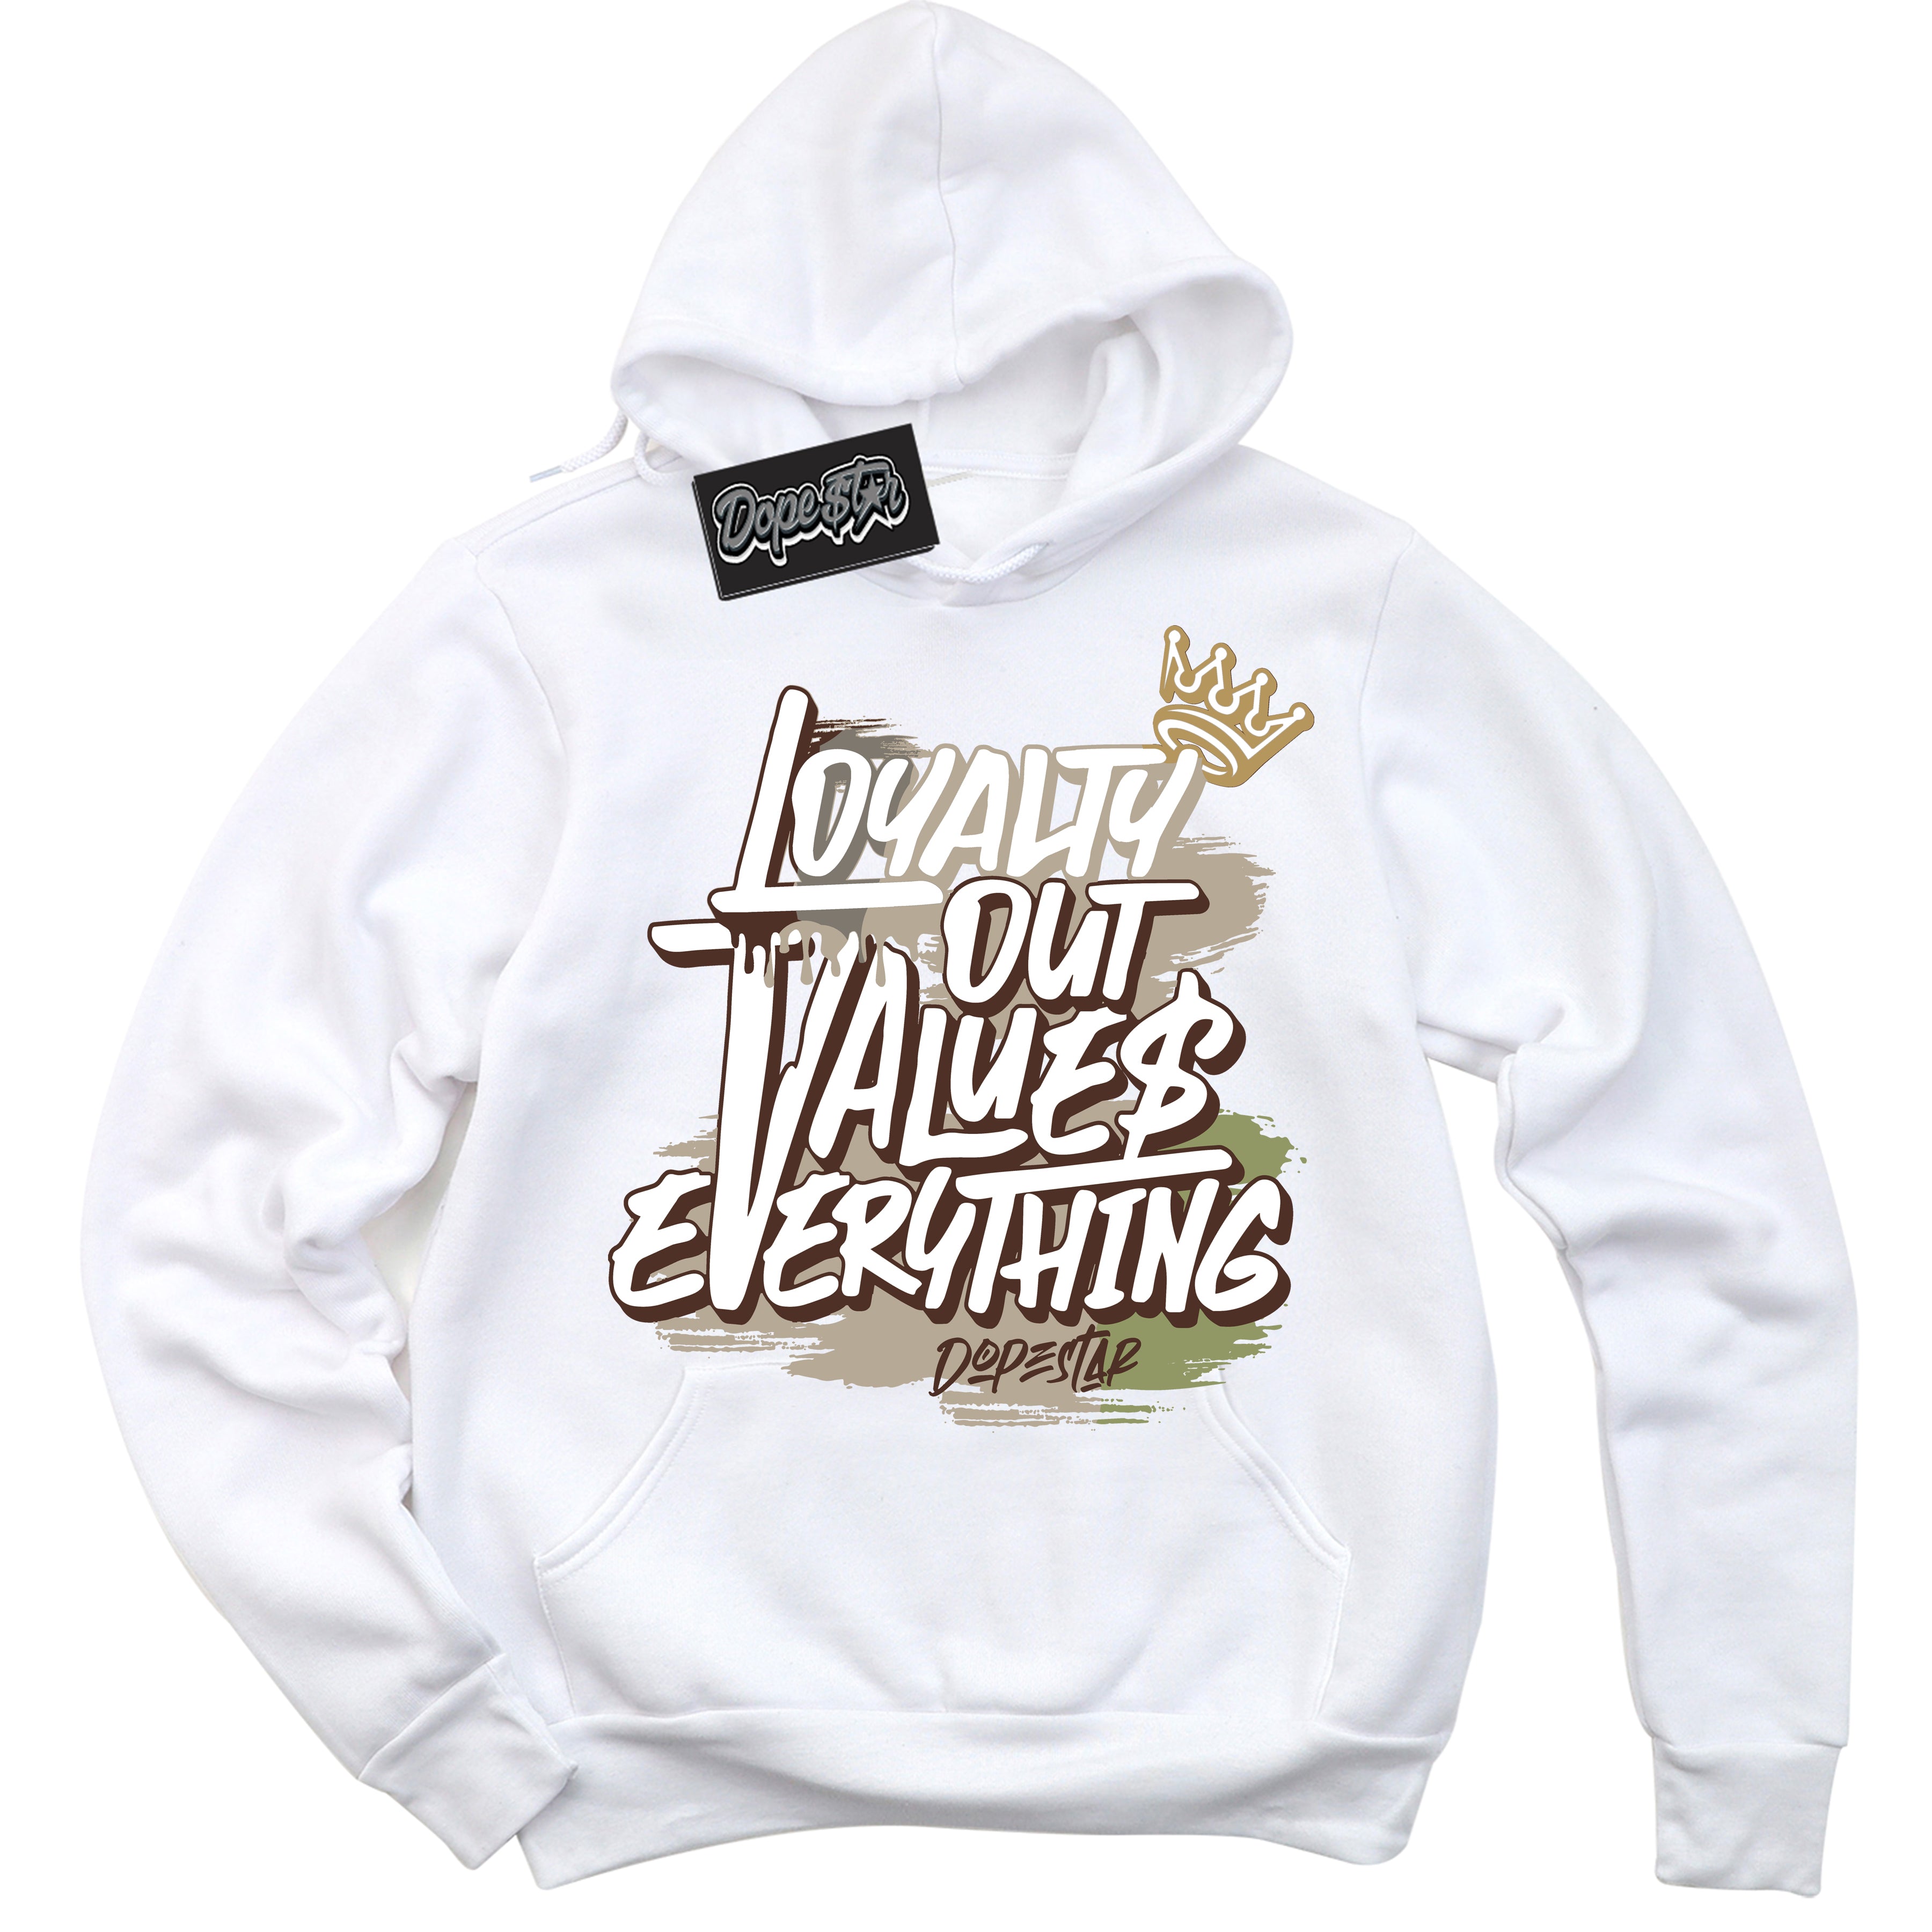 Cool White Hoodie with “ Loyalty Out Values Everything ”  design that Perfectly Matches Zion Williamson Voodoo 1s Sneakers.